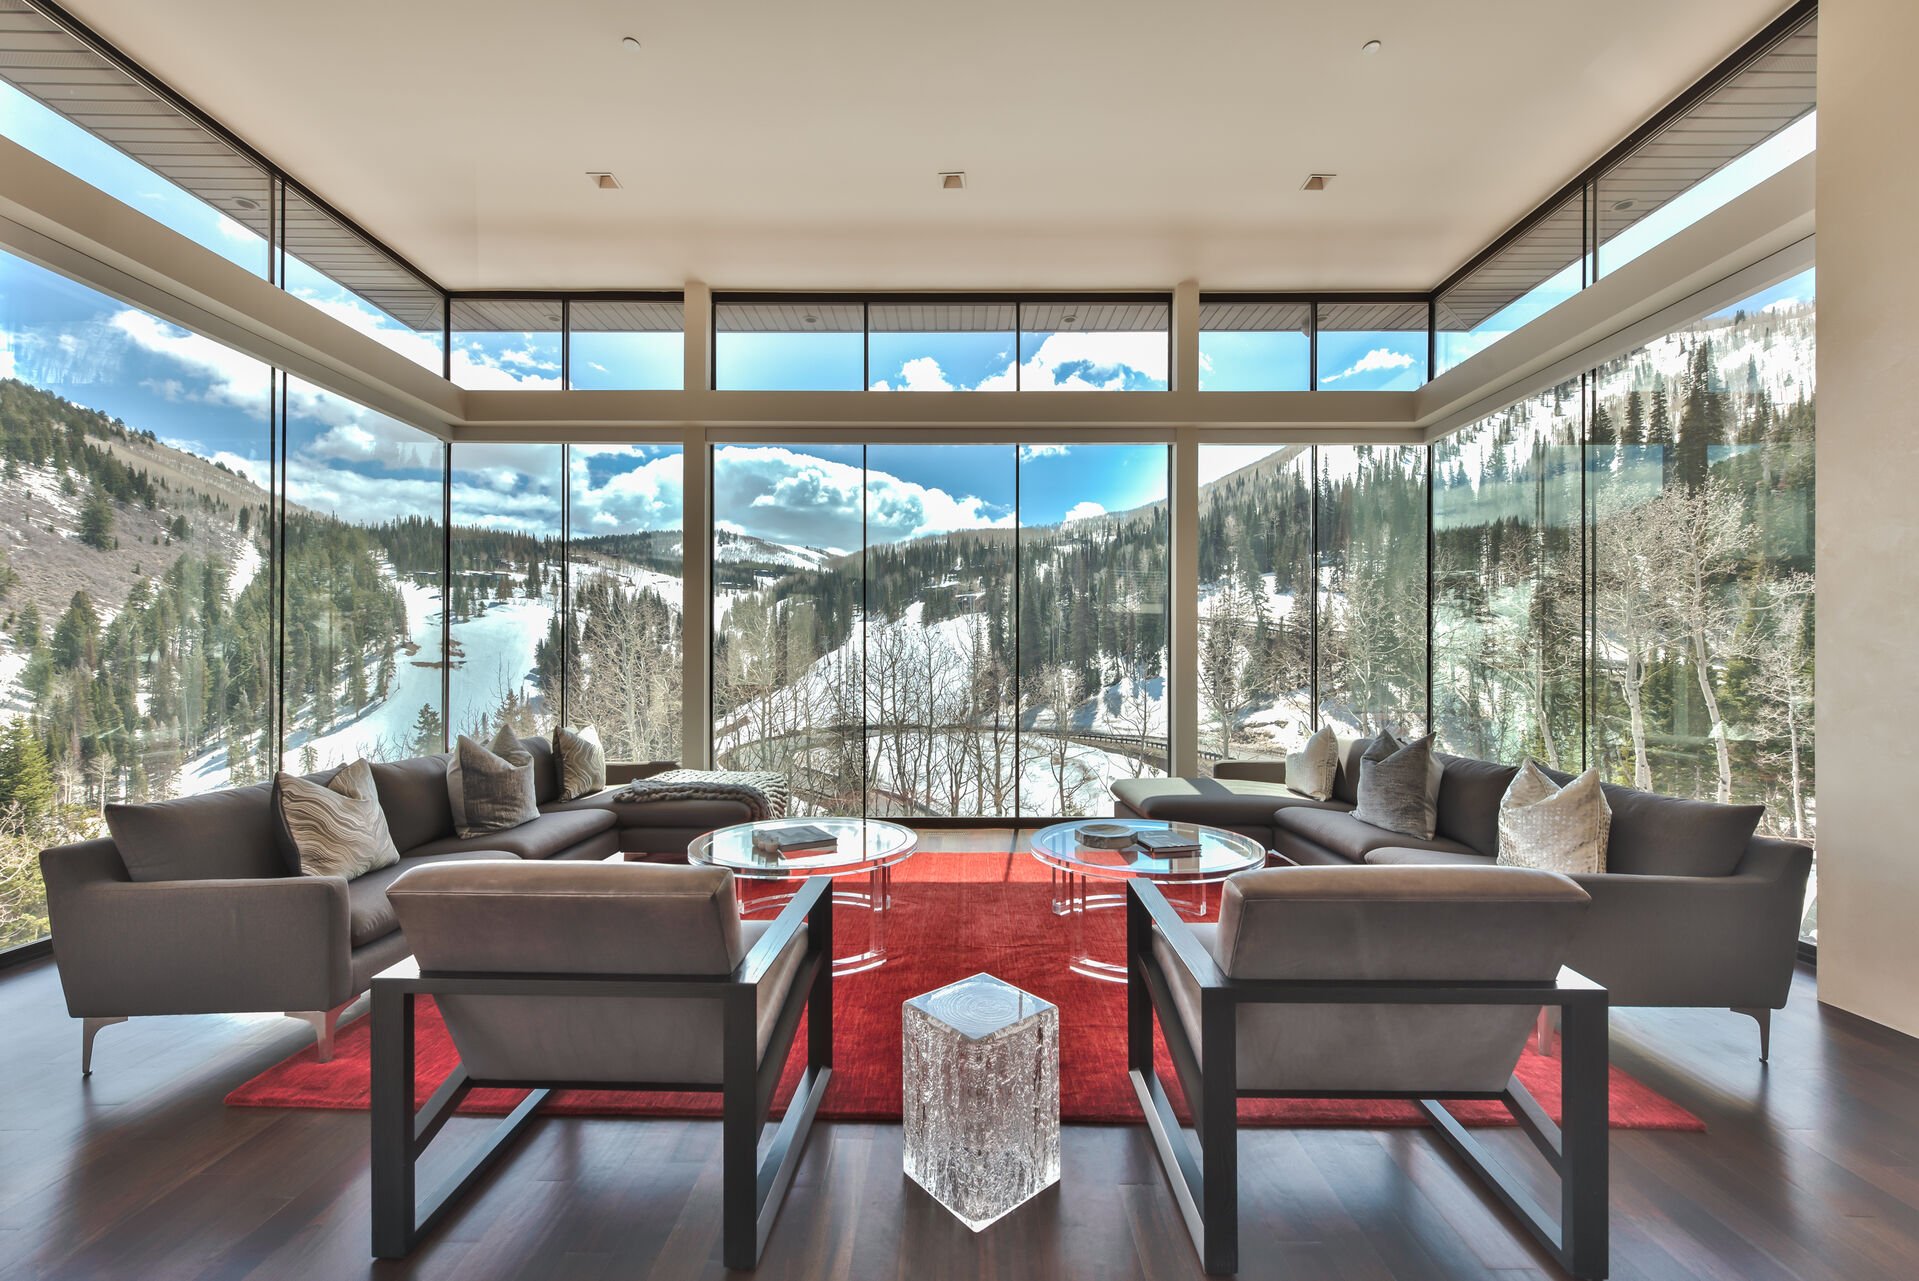 Over 13,000 Sq Ft of Luxury with Exquisite Views from Every Room!